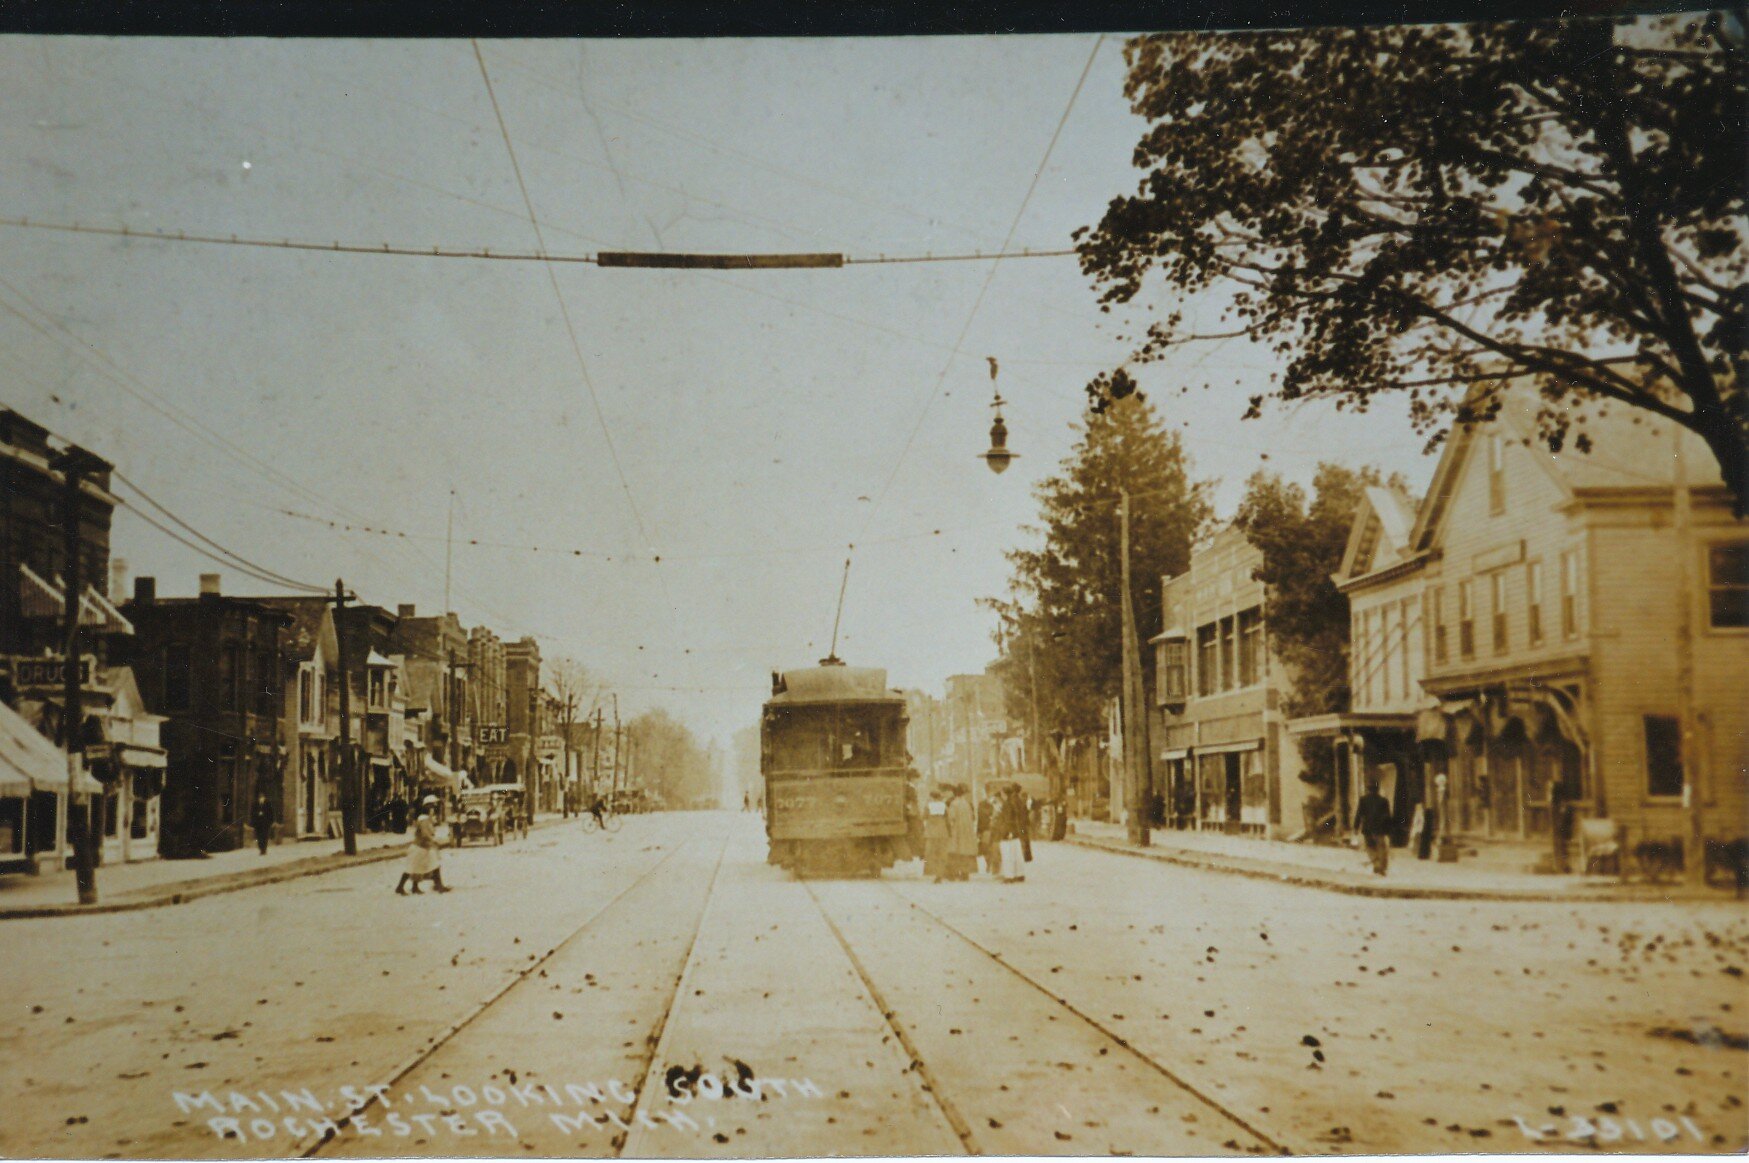 Looking south down Main Street at the Fifth St (now University Dr) intersection. The corner building on the right is the current location of Bean and Leaf.